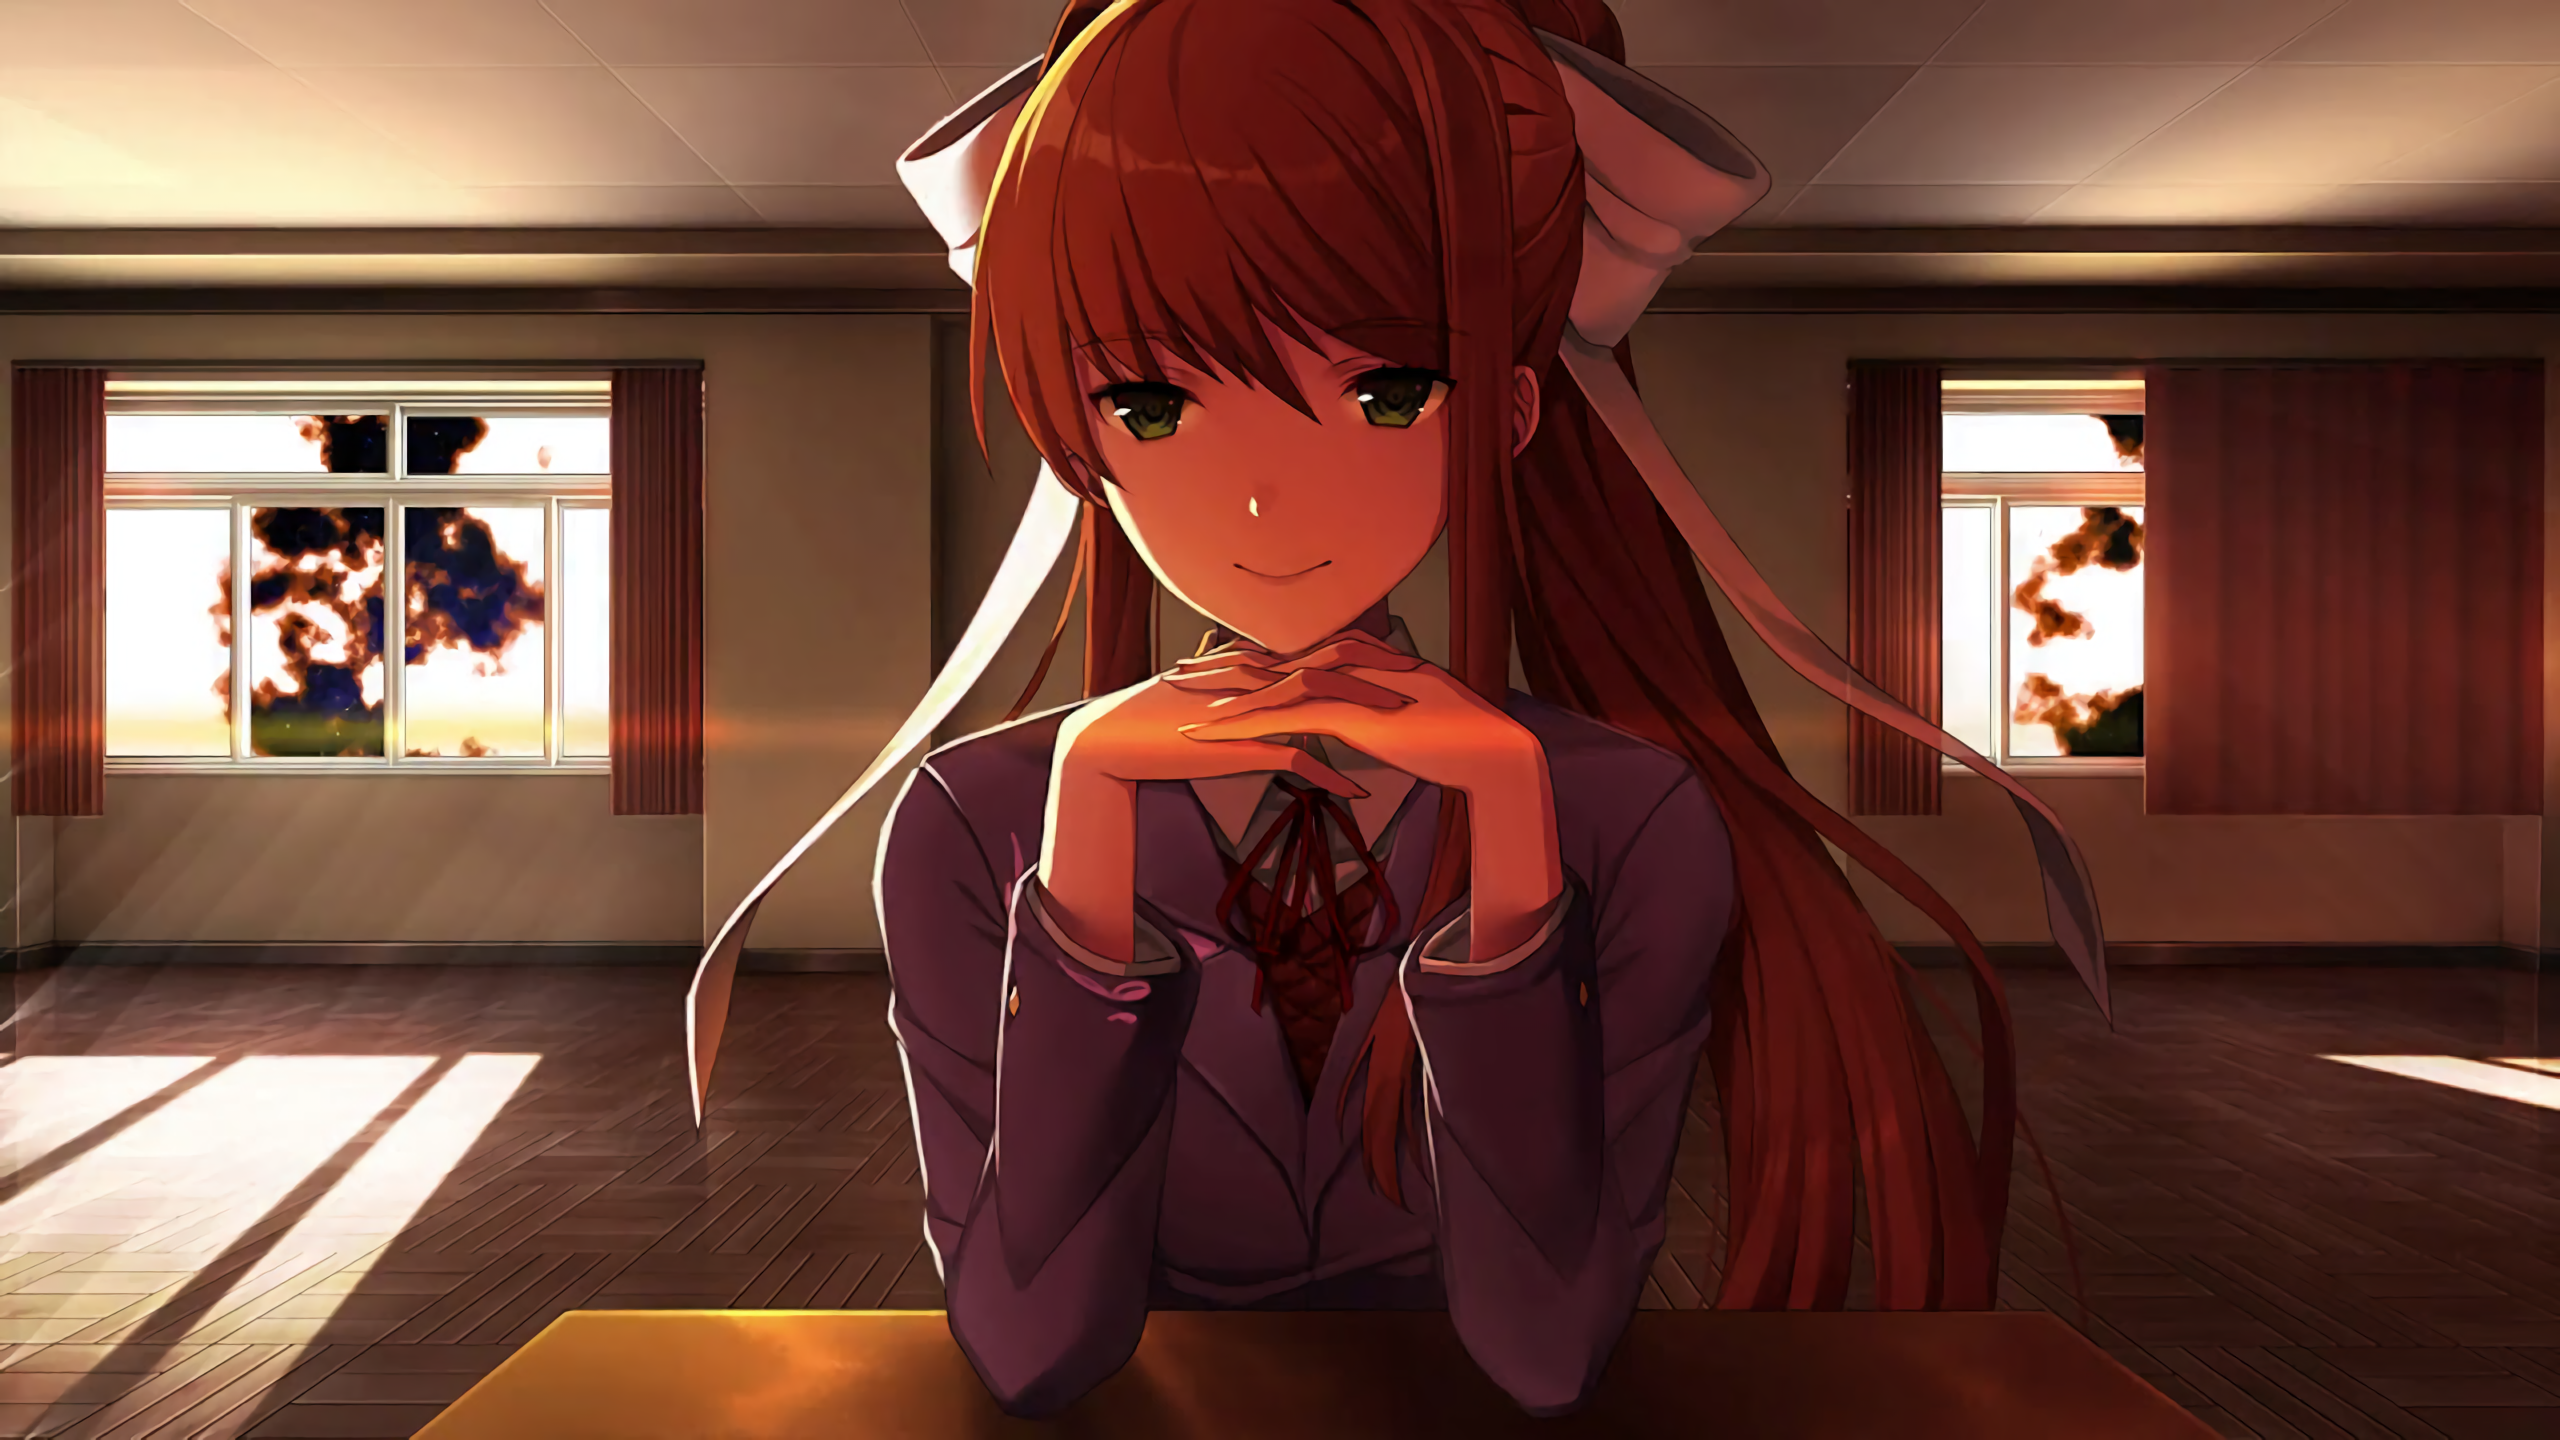 Just Monika by Satchely